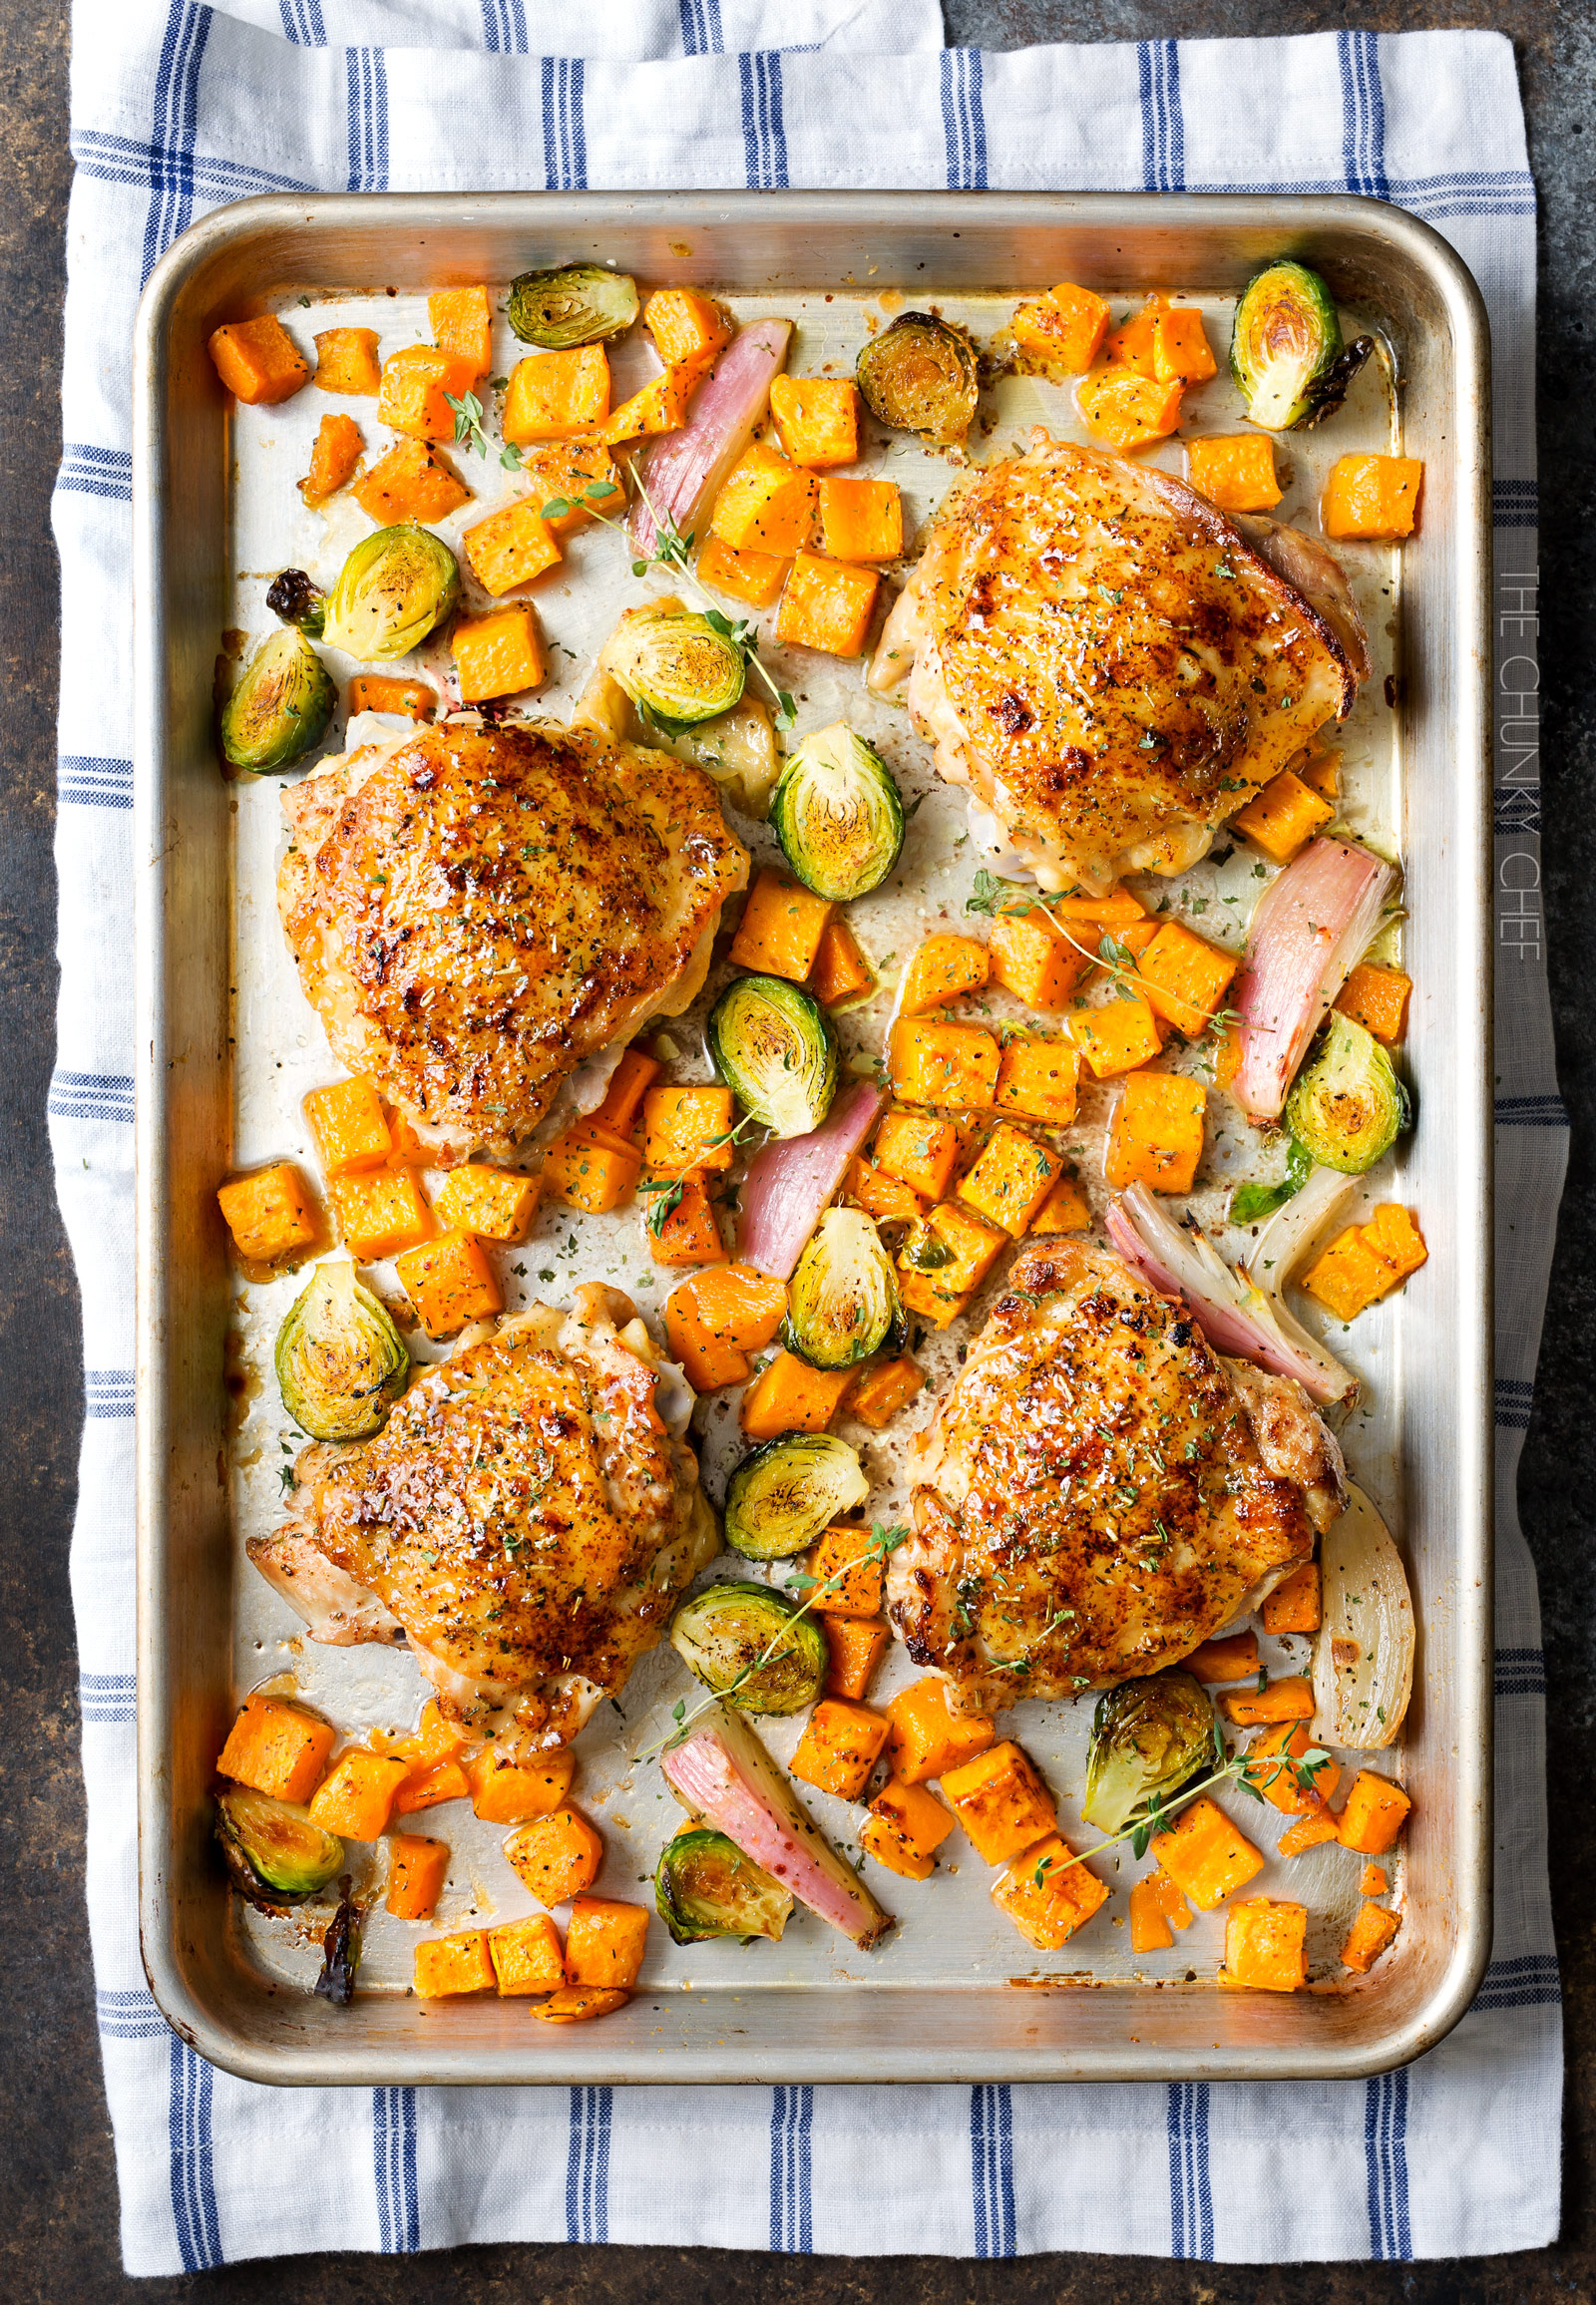 Sheet Pan Maple Mustard Roasted Chicken | Chicken thighs are coated in a sweet and savory maple mustard sauce and roasted alongside creamy butternut squash and savory brussels sprouts, all on one sheet pan for an incredibly quick, easy meal with hardly any cleanup needed! | http://thechunkychef.com